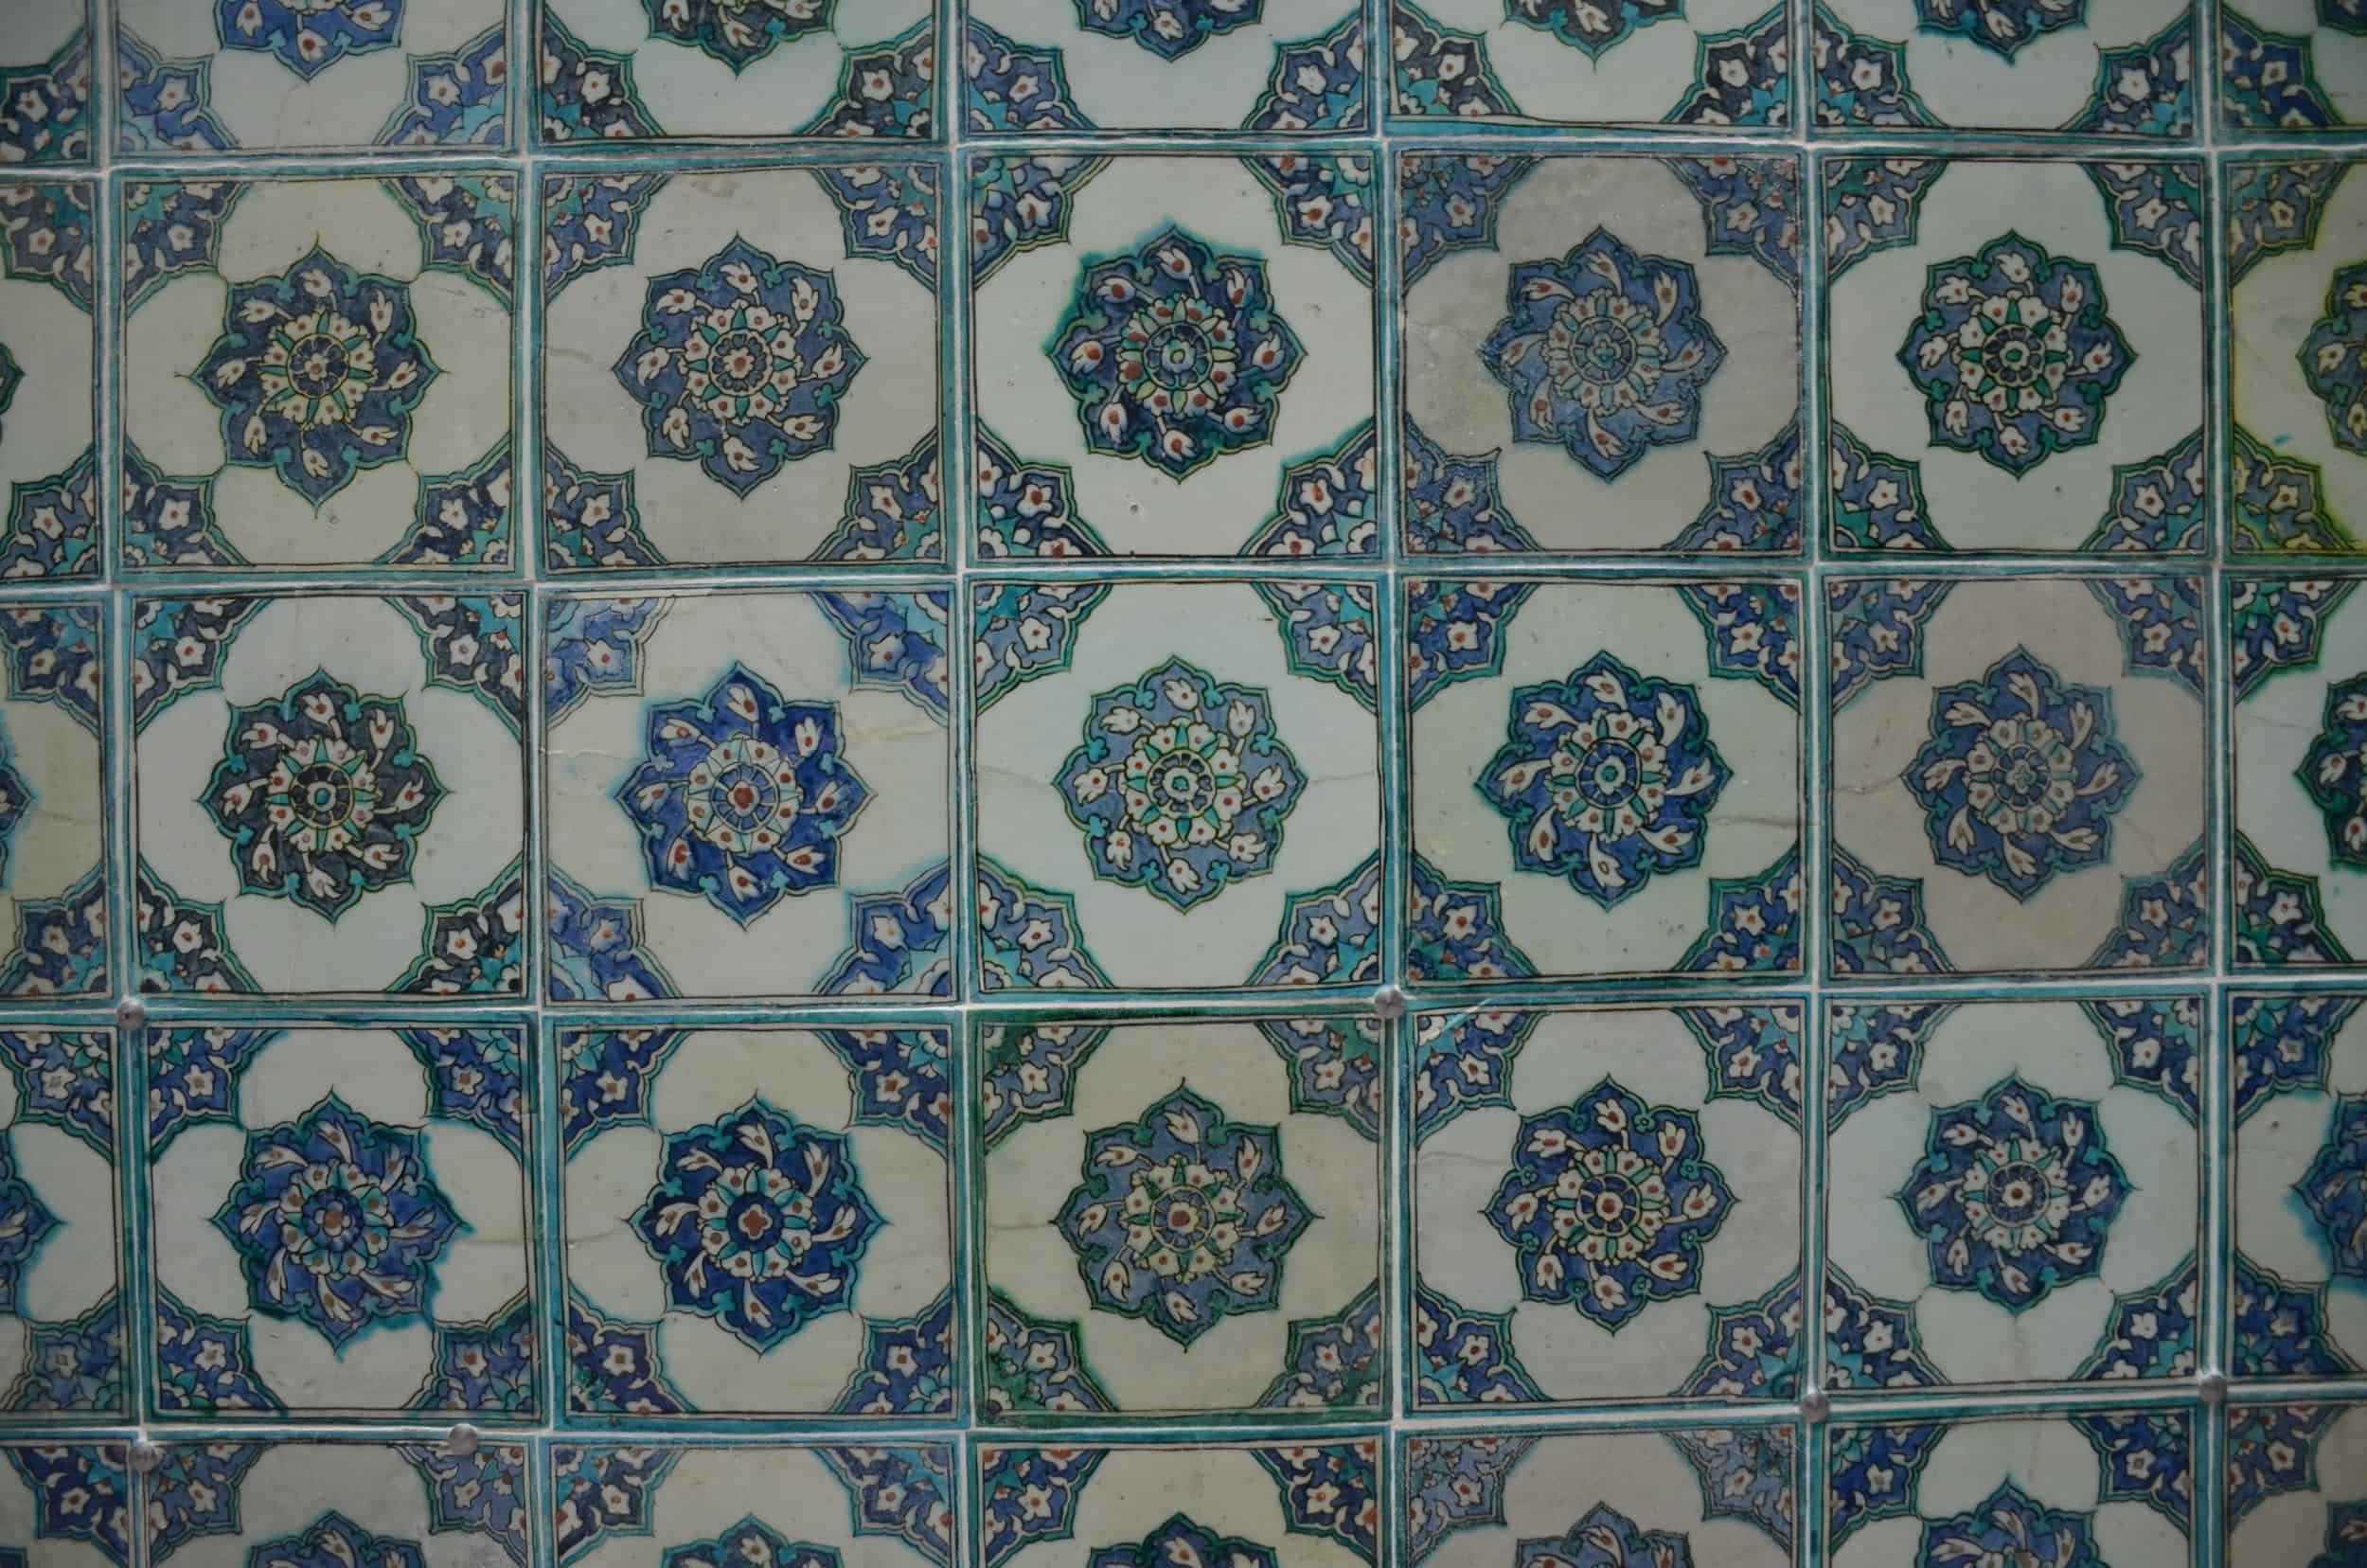 Tiles in the Hall with the Fountain